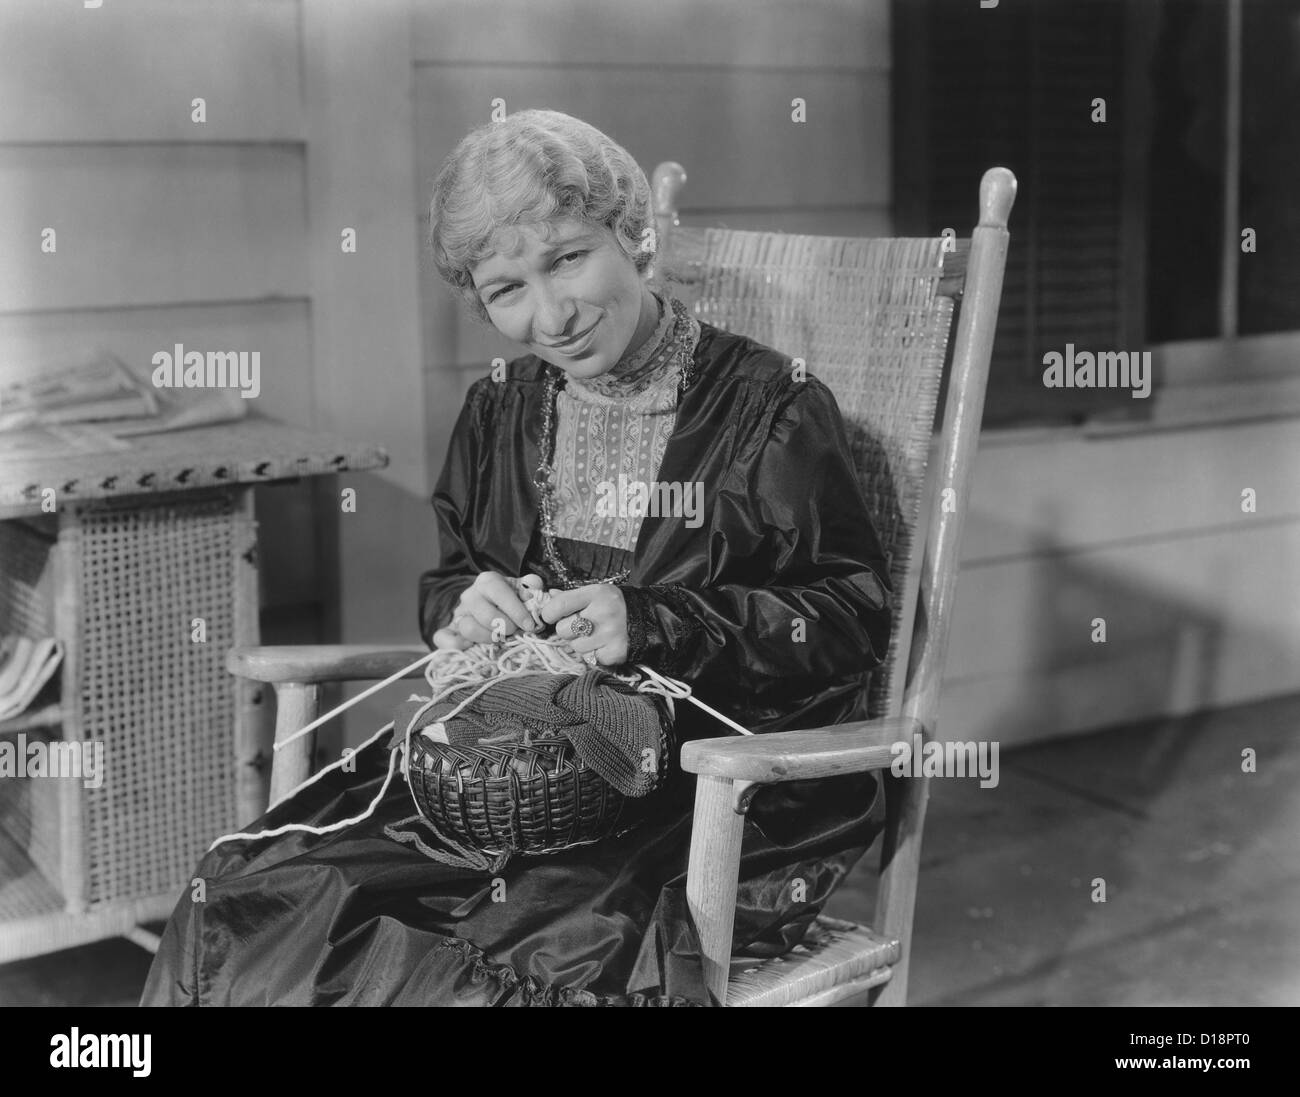 Smiling woman knitting in her rocking chair Stock Photo